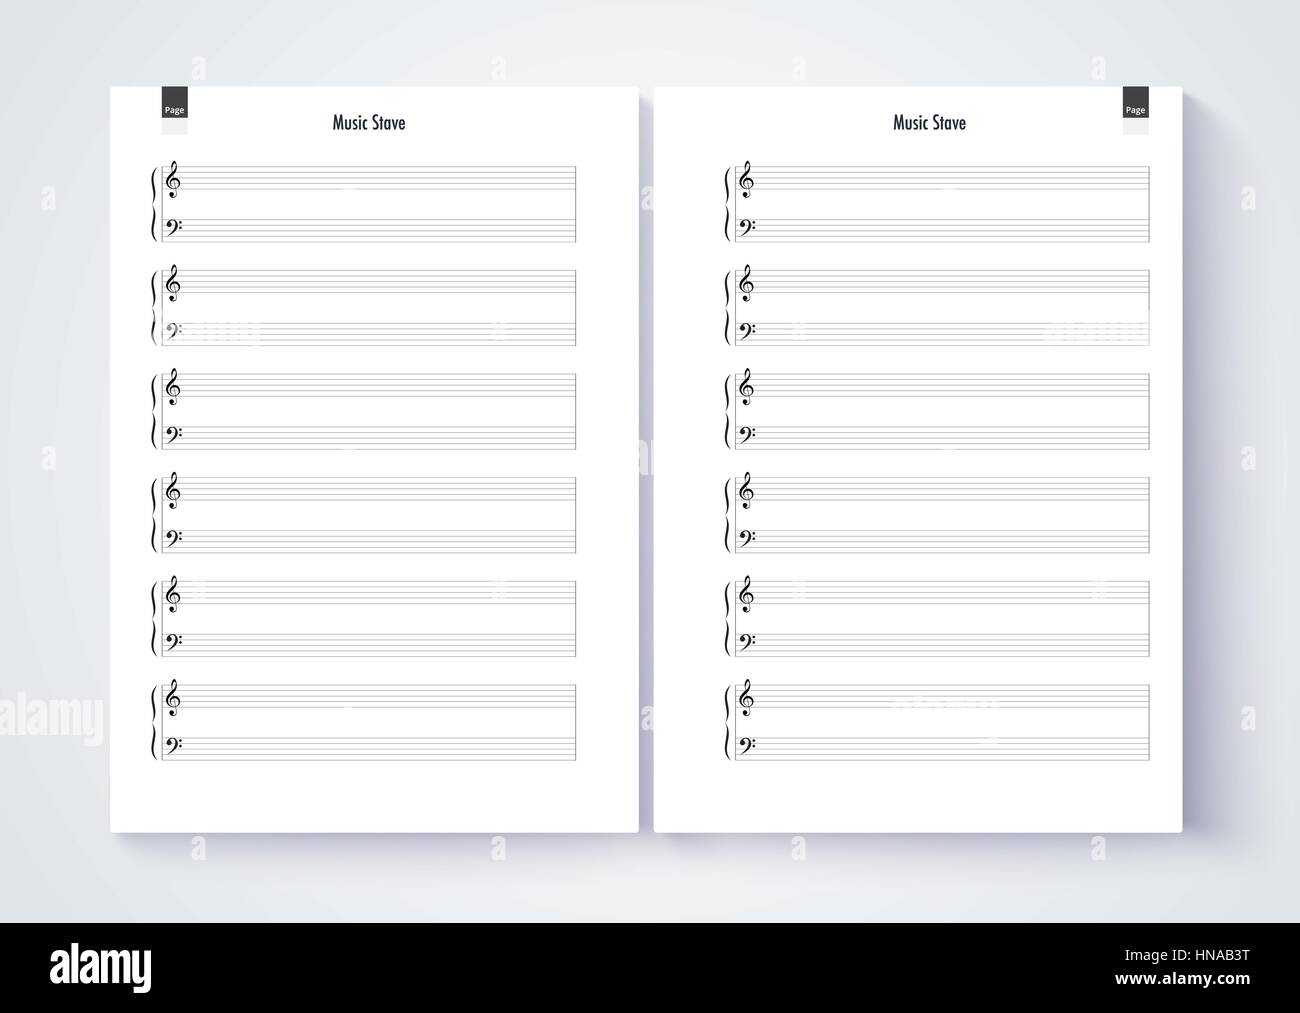 Music Paper Template from c8.alamy.com